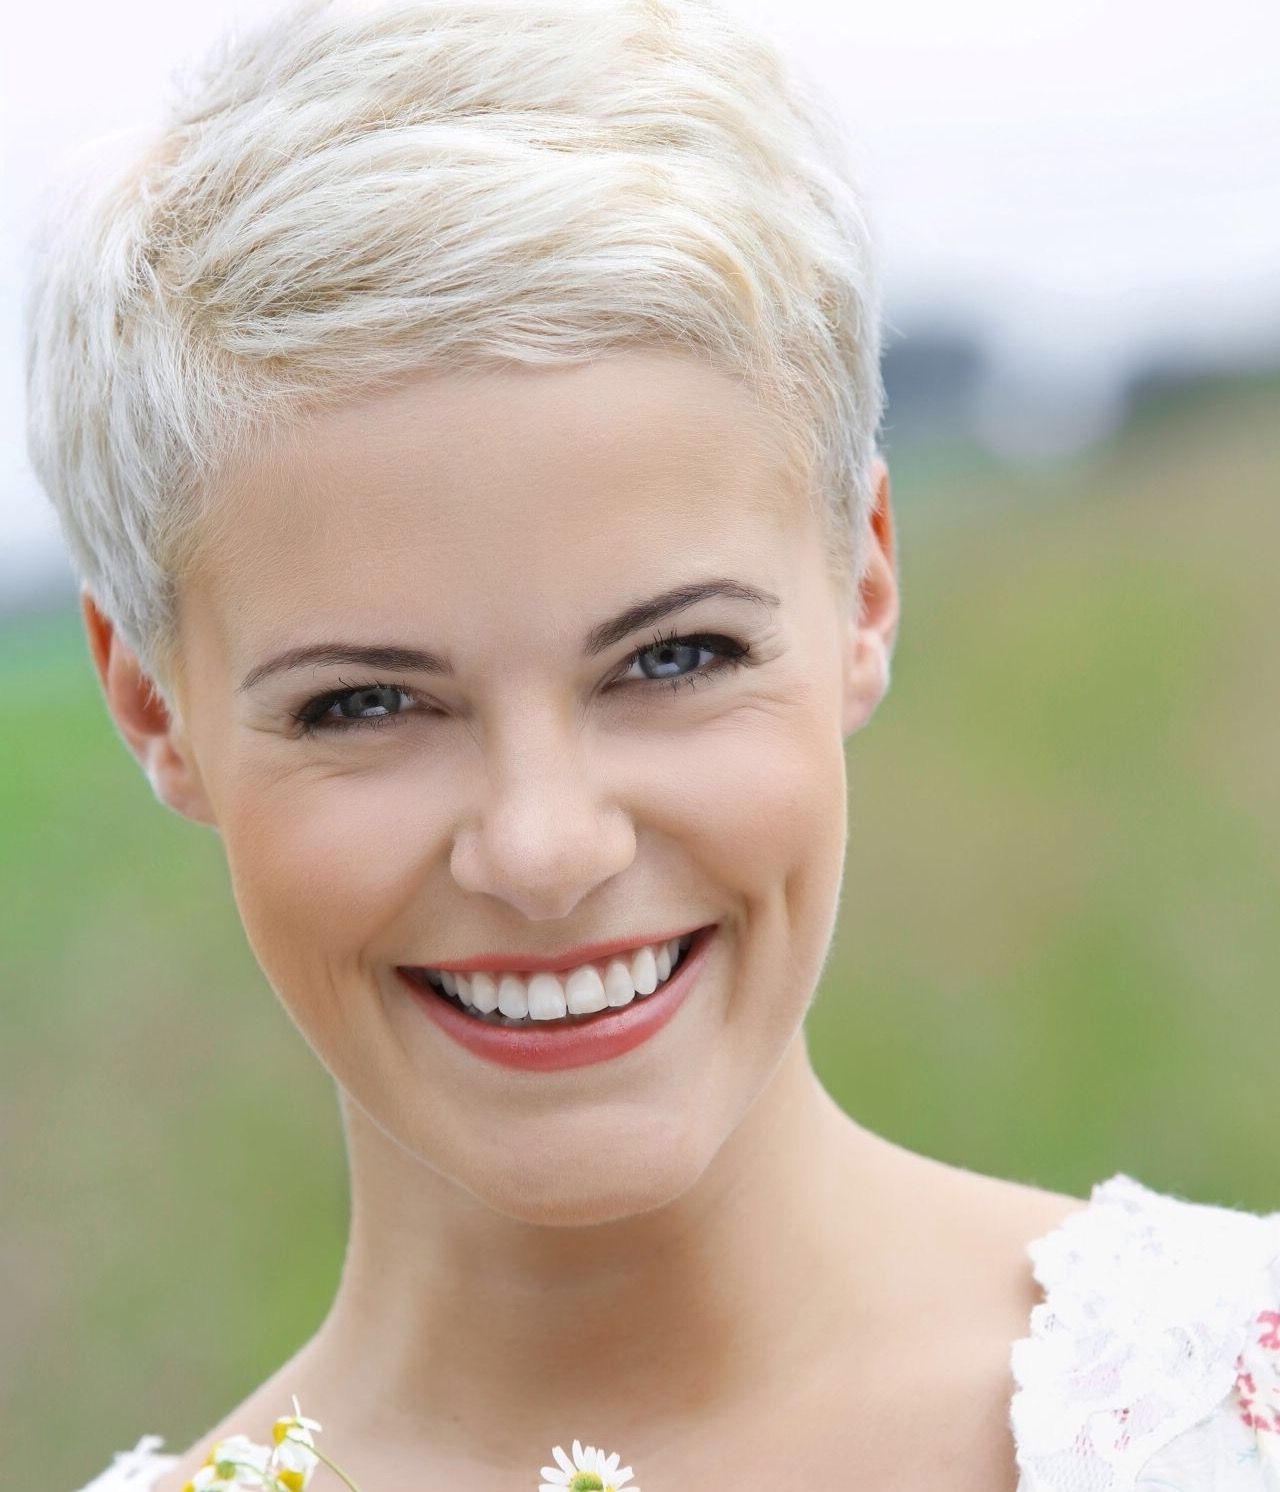 Pinchristy Watts On It's Only Hair | Pinterest | Short Hair With Regard To Best And Newest Cute Short Pixie Hairstyles (View 8 of 15)